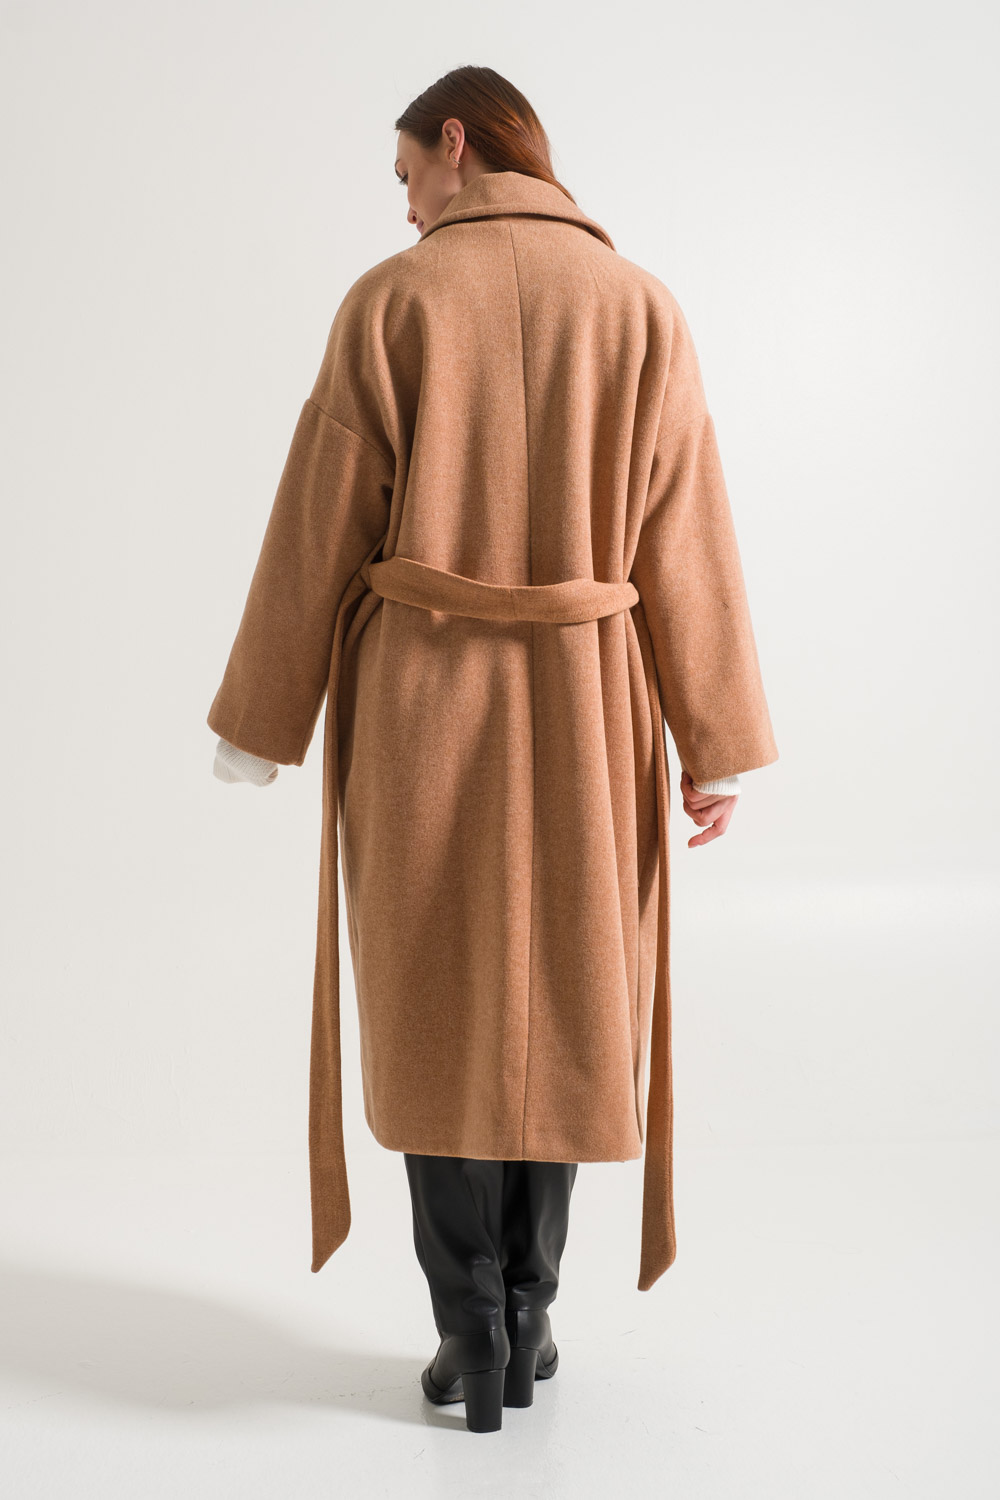 Oversize Tan Cachet Coat with Wide Pockets